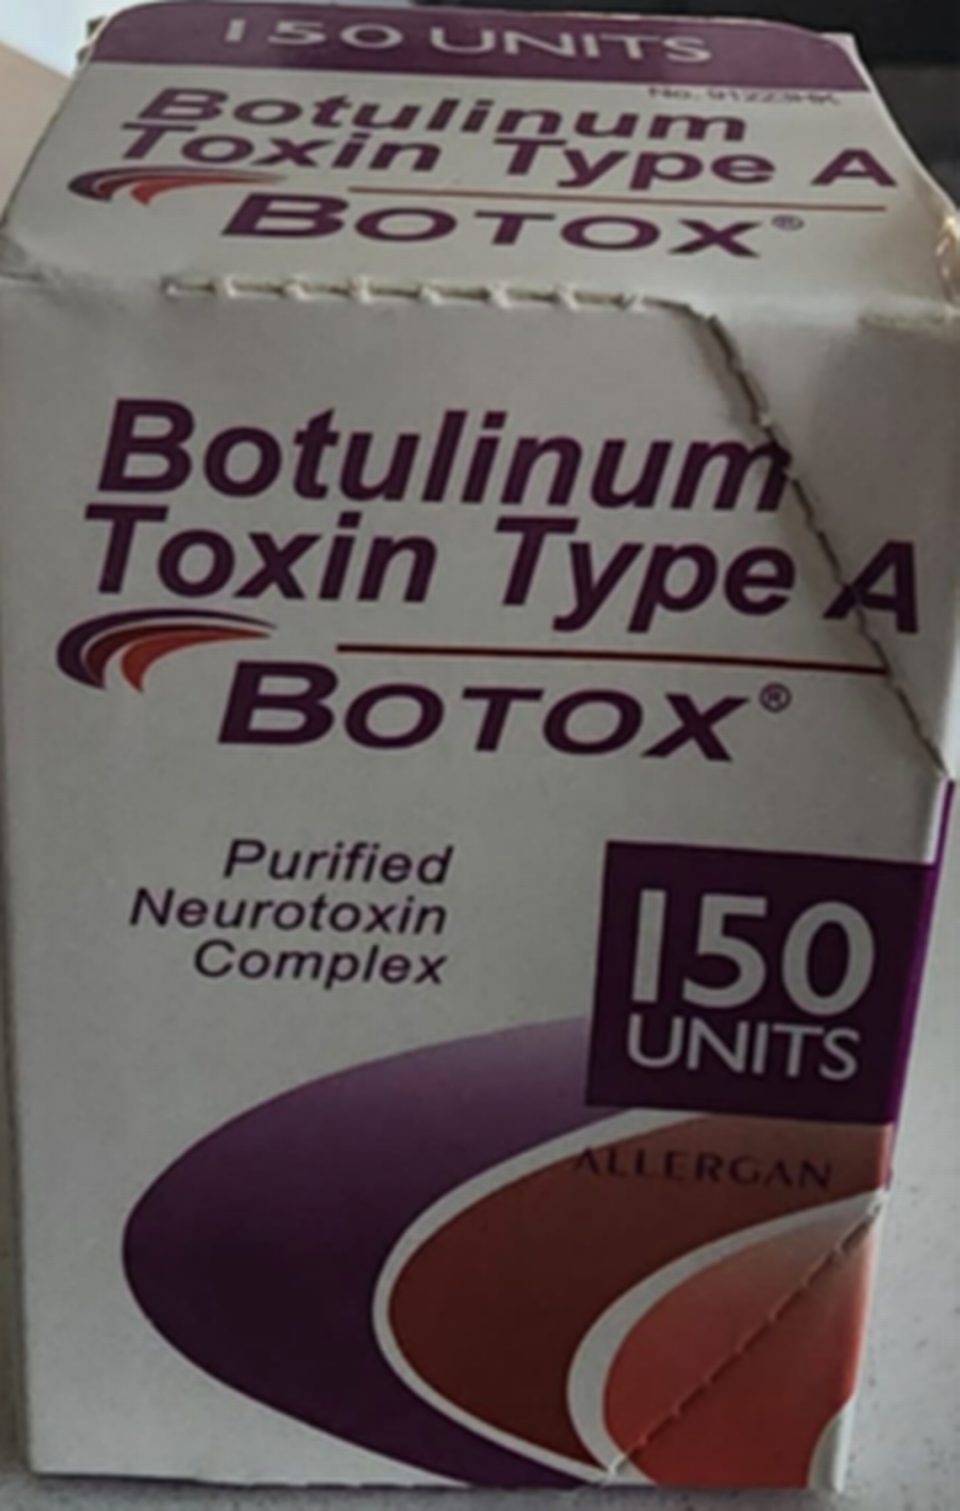 Counterfeit Botox has been found in various states including California.